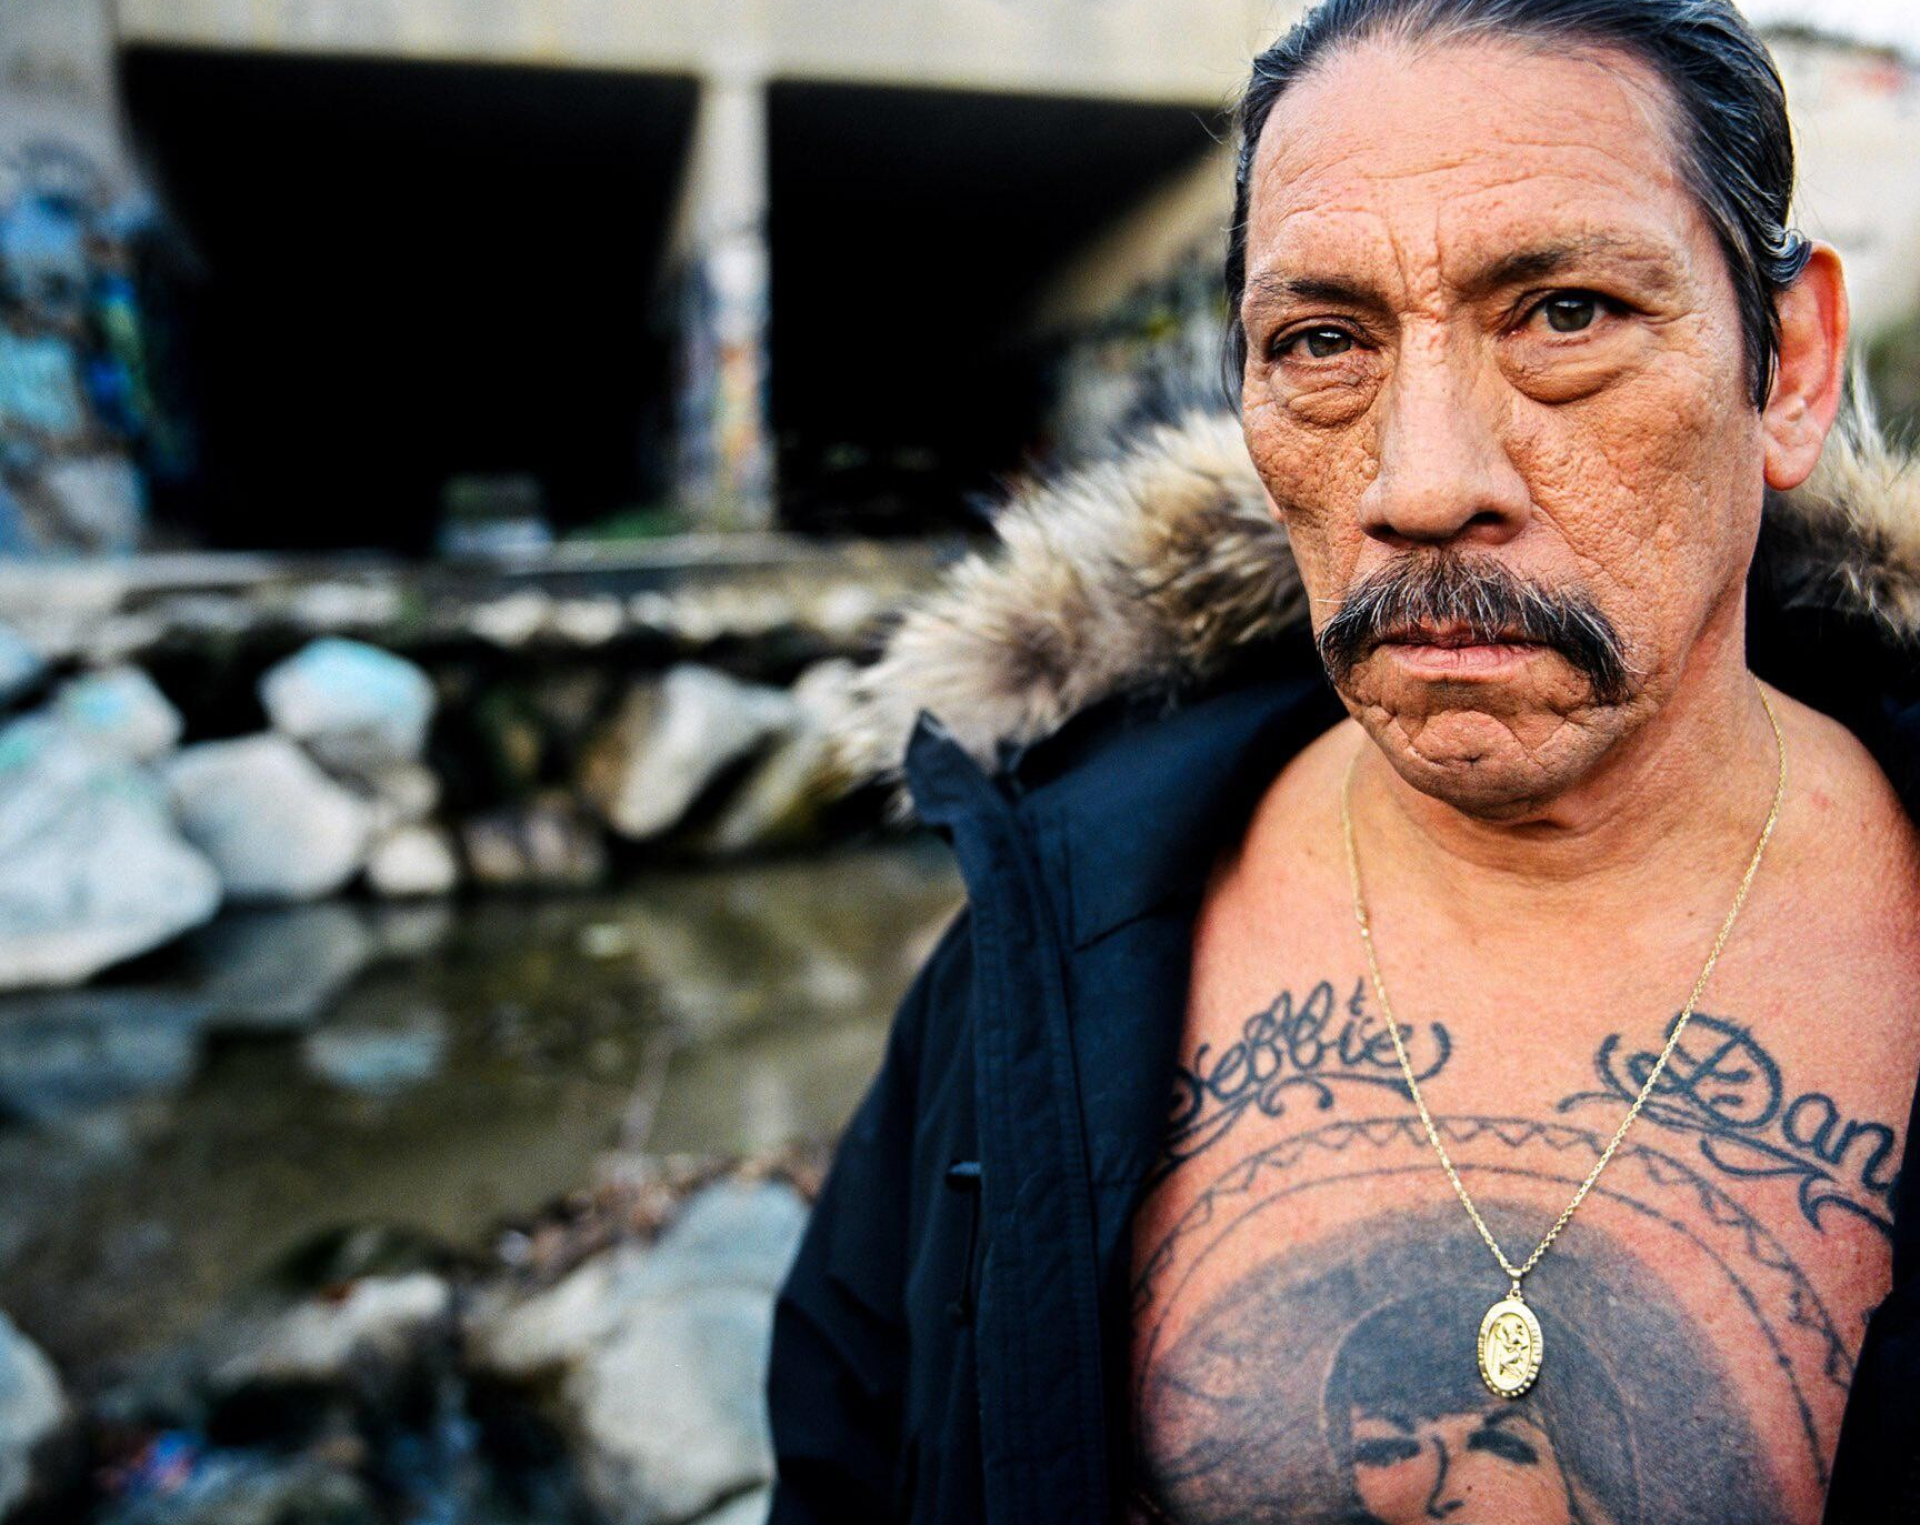 Danny Trejo: An American actor of Mexican descent, Portraying villains or anti-heroes, Machete. 1920x1530 HD Background.